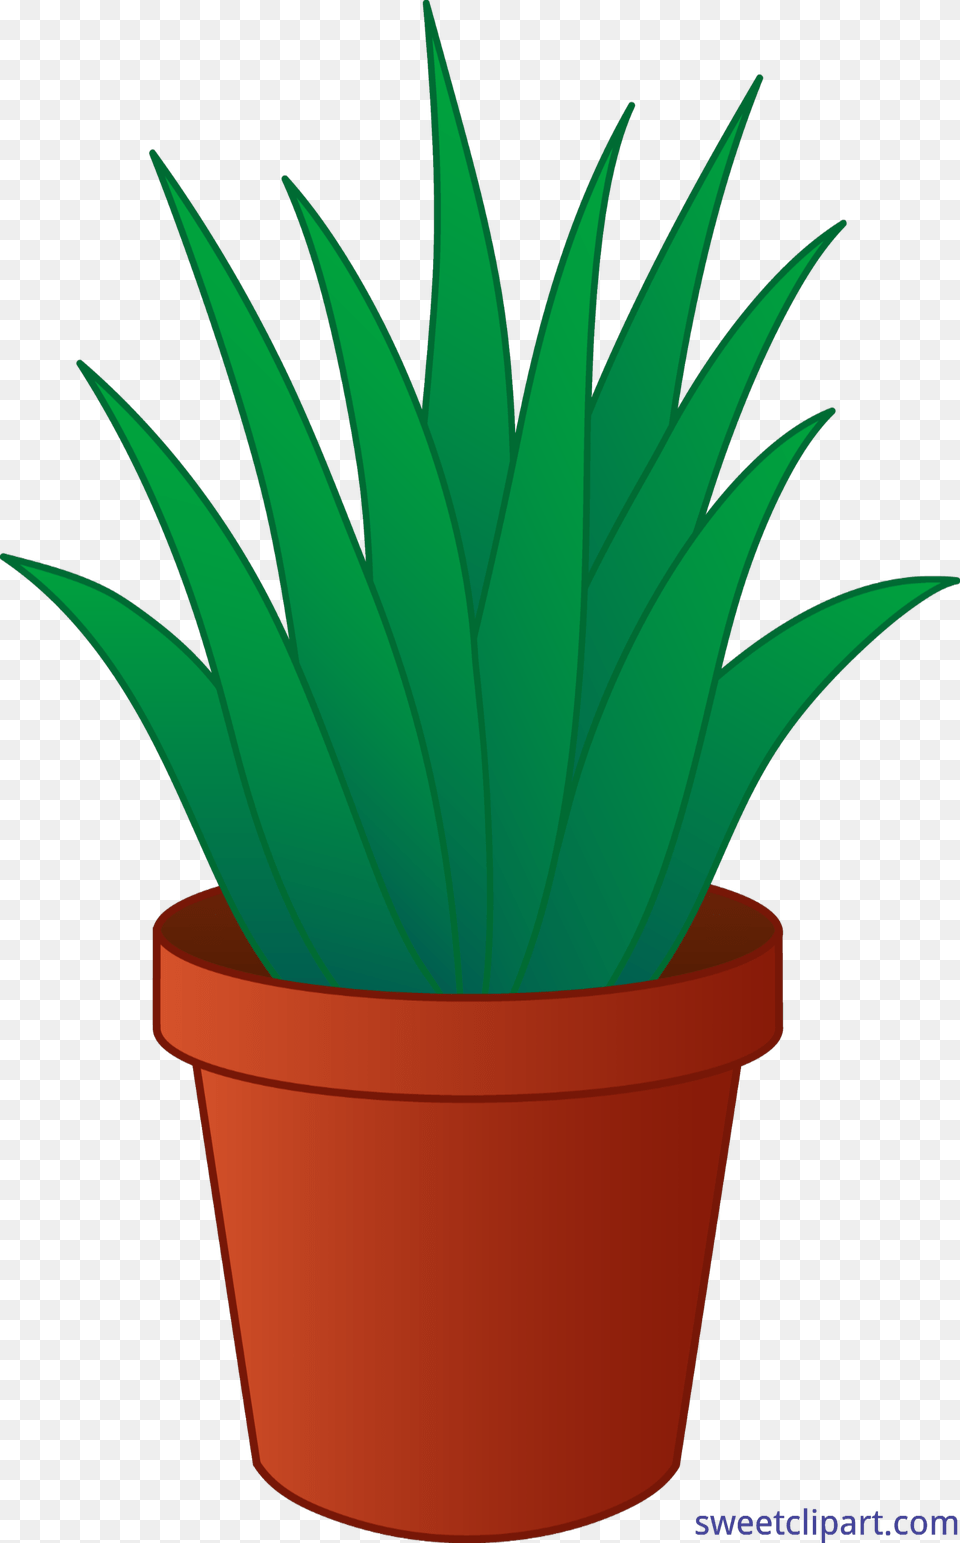 Flower In A Pot Clipart At Getdrawings Potted Plant Clipart, Potted Plant, Aloe, Leaf Free Transparent Png